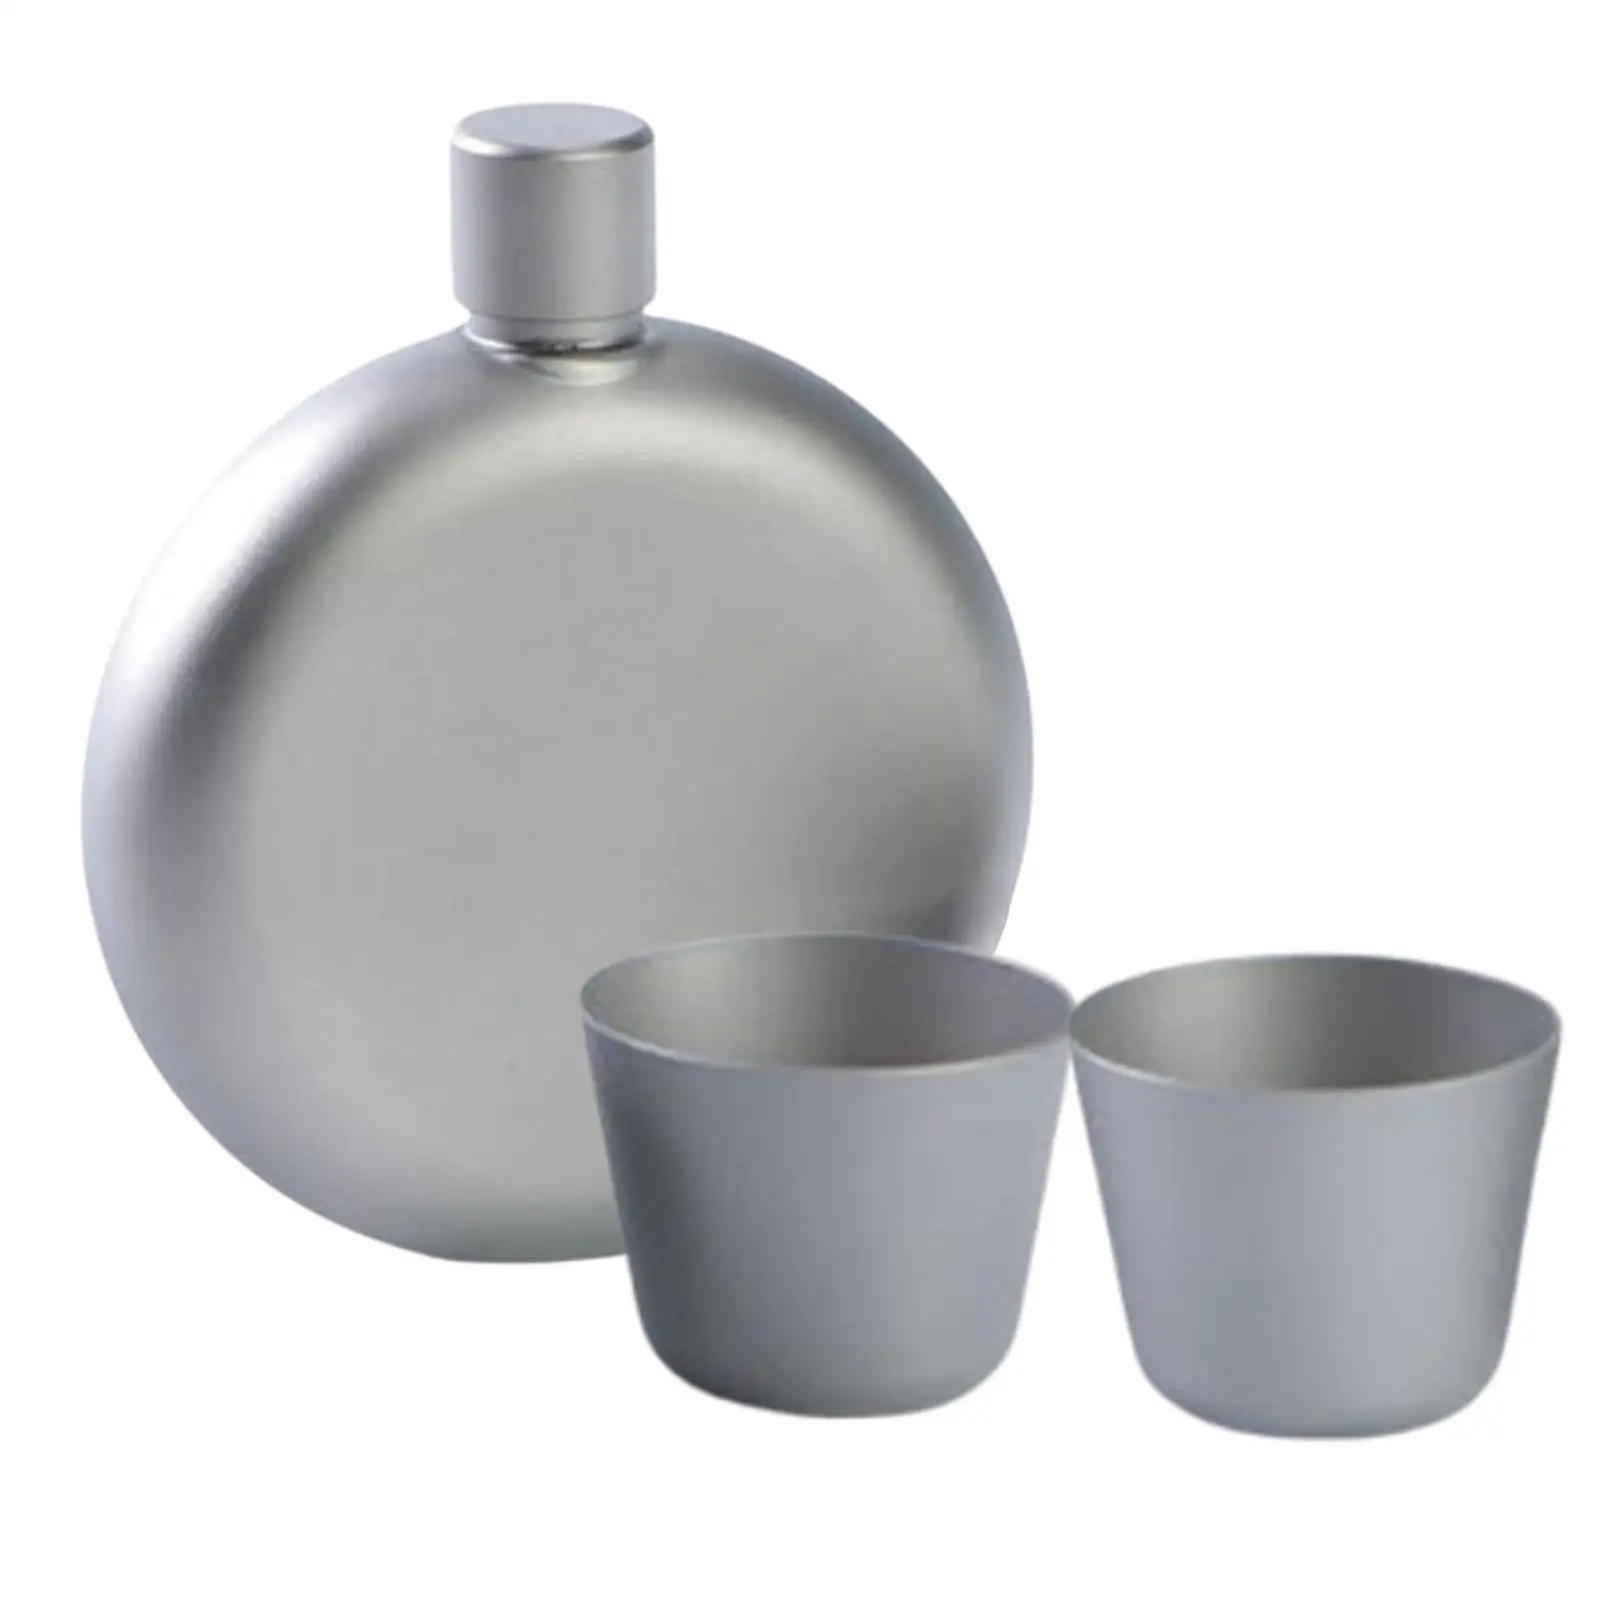 150ml Leakproof Titanium Flask Alcohol Whisky Wine Flask with Cups for Outdoor Camping Backpacking Travel Picnic